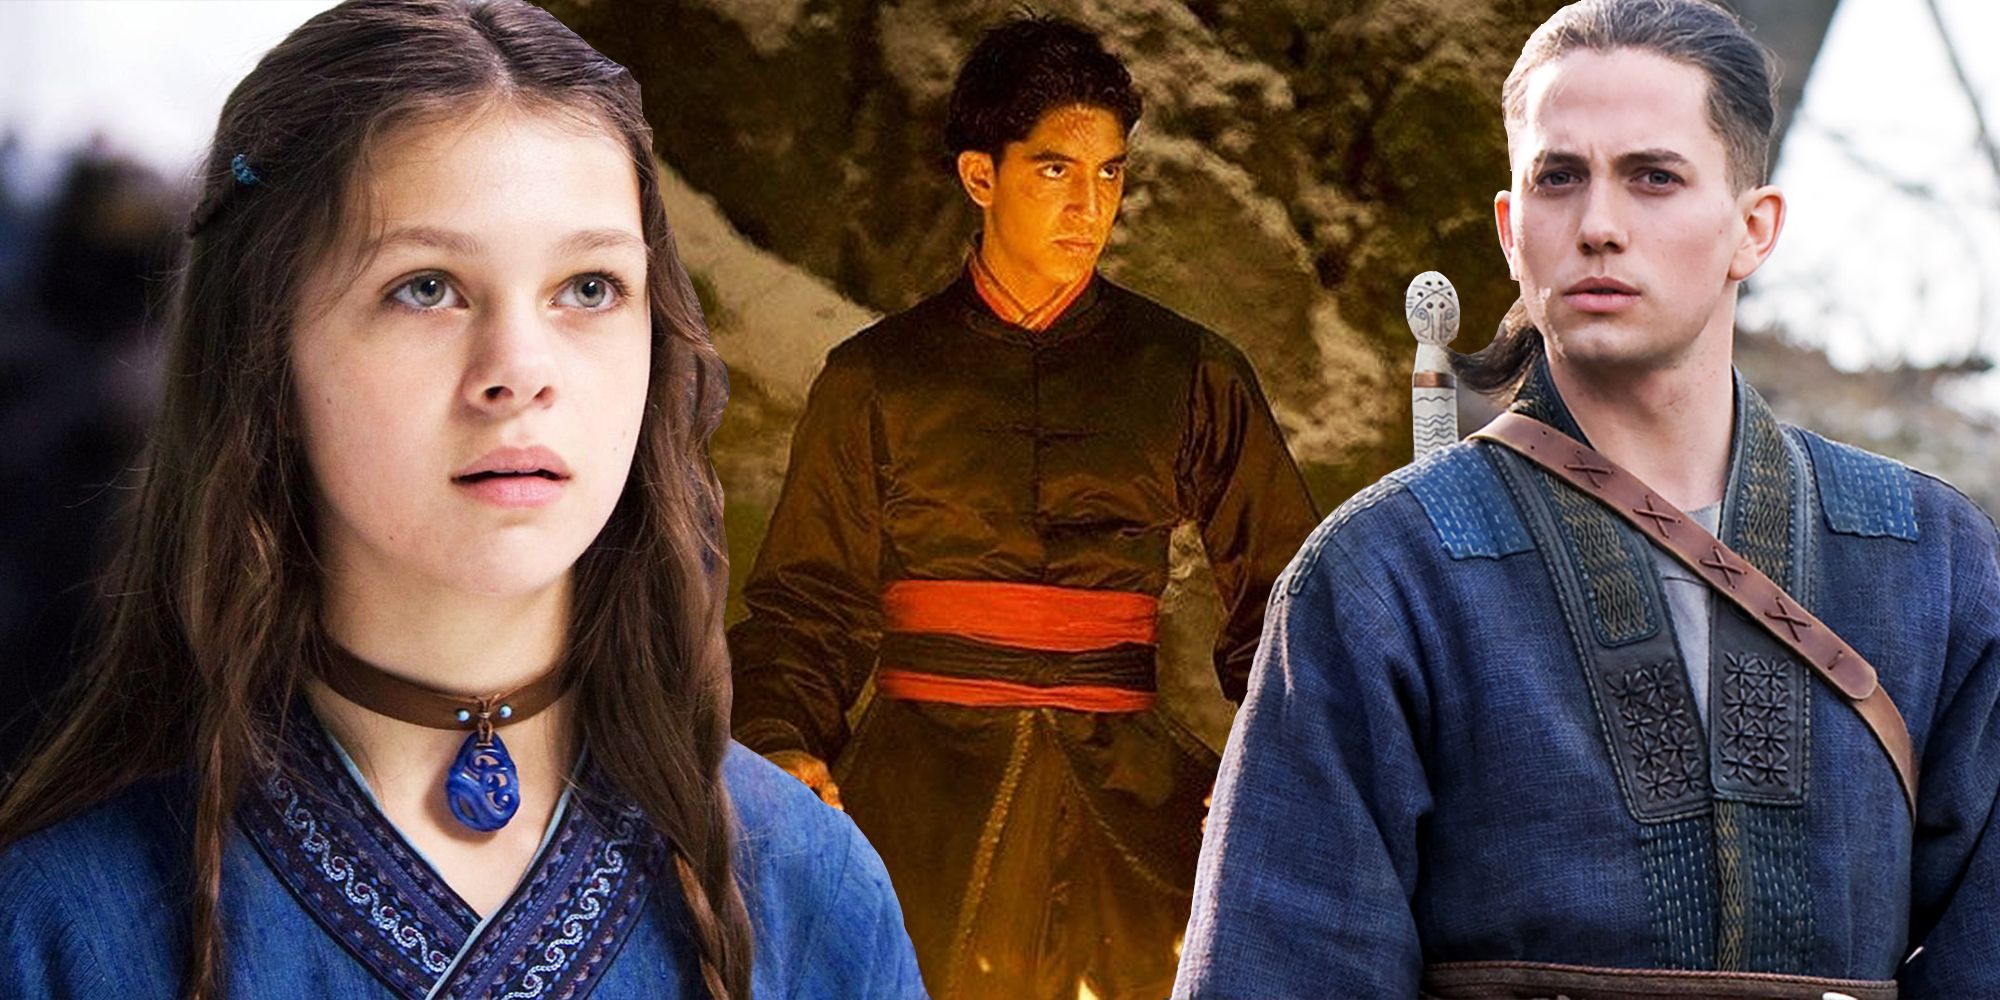 Avatar The Last Airbender LiveAction Film Release date, Cast And